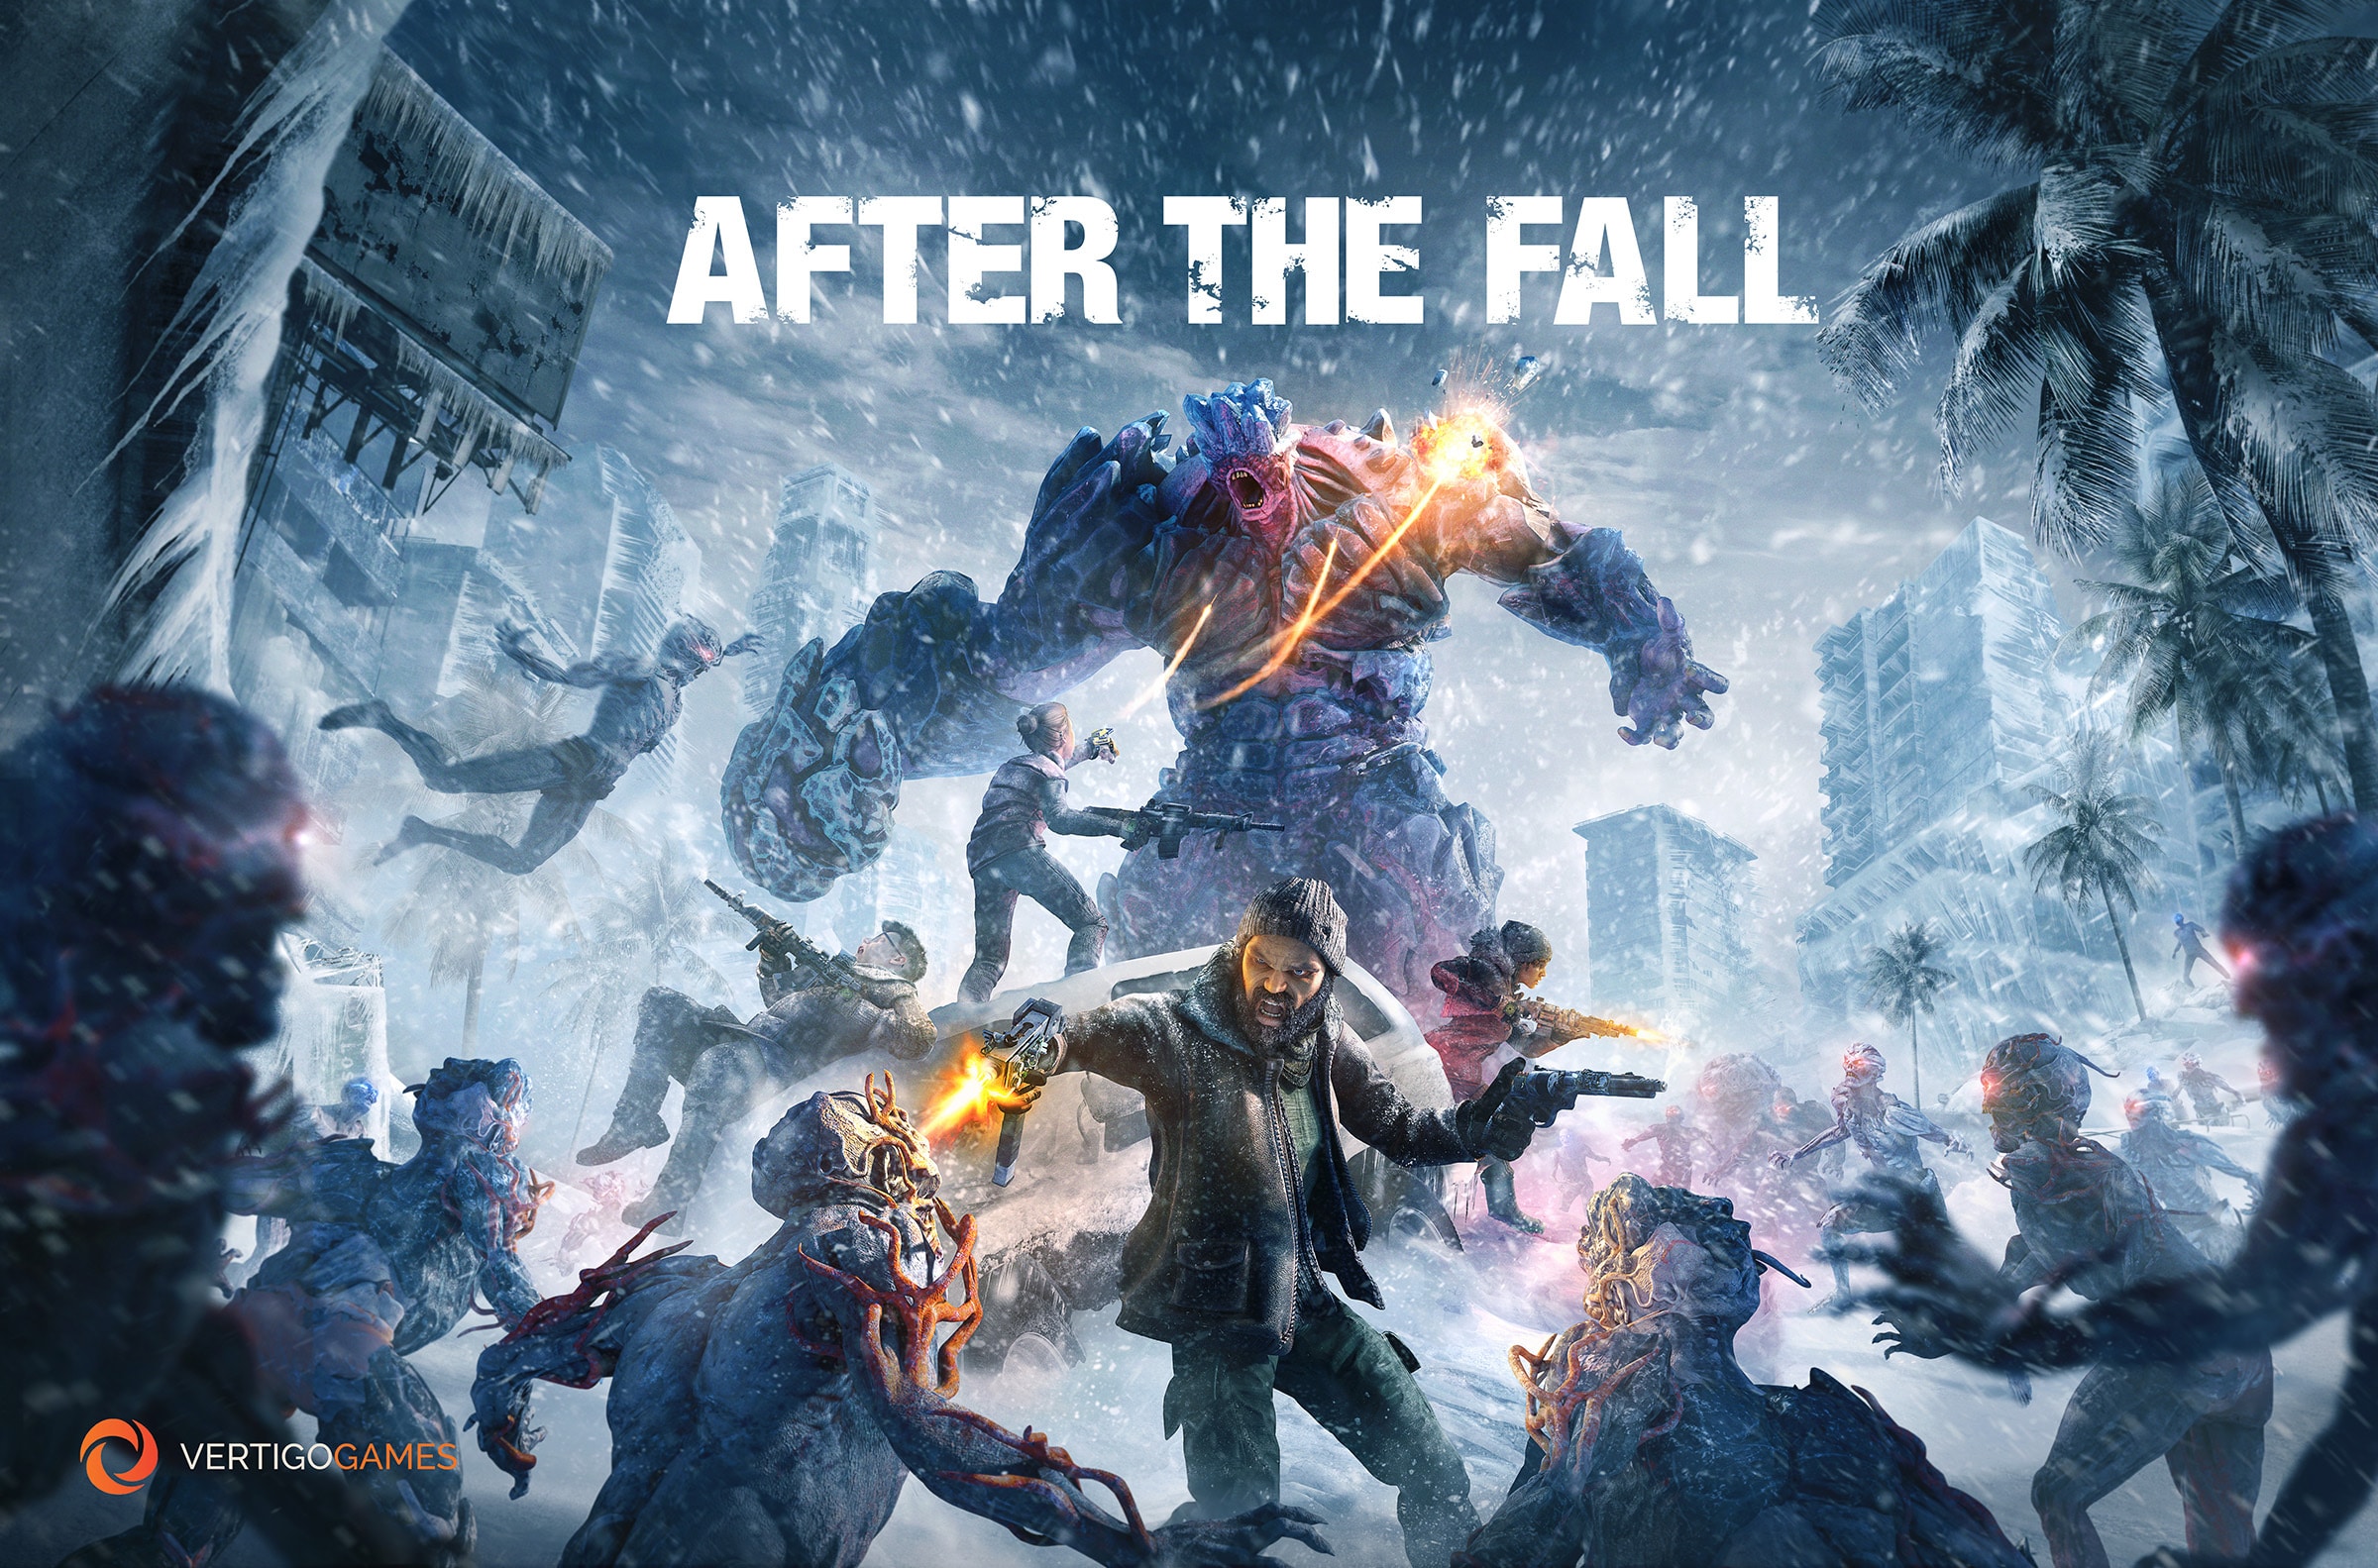 Record sales for After The Fall, the highly anticipated VR game released on December 9th thumbnail